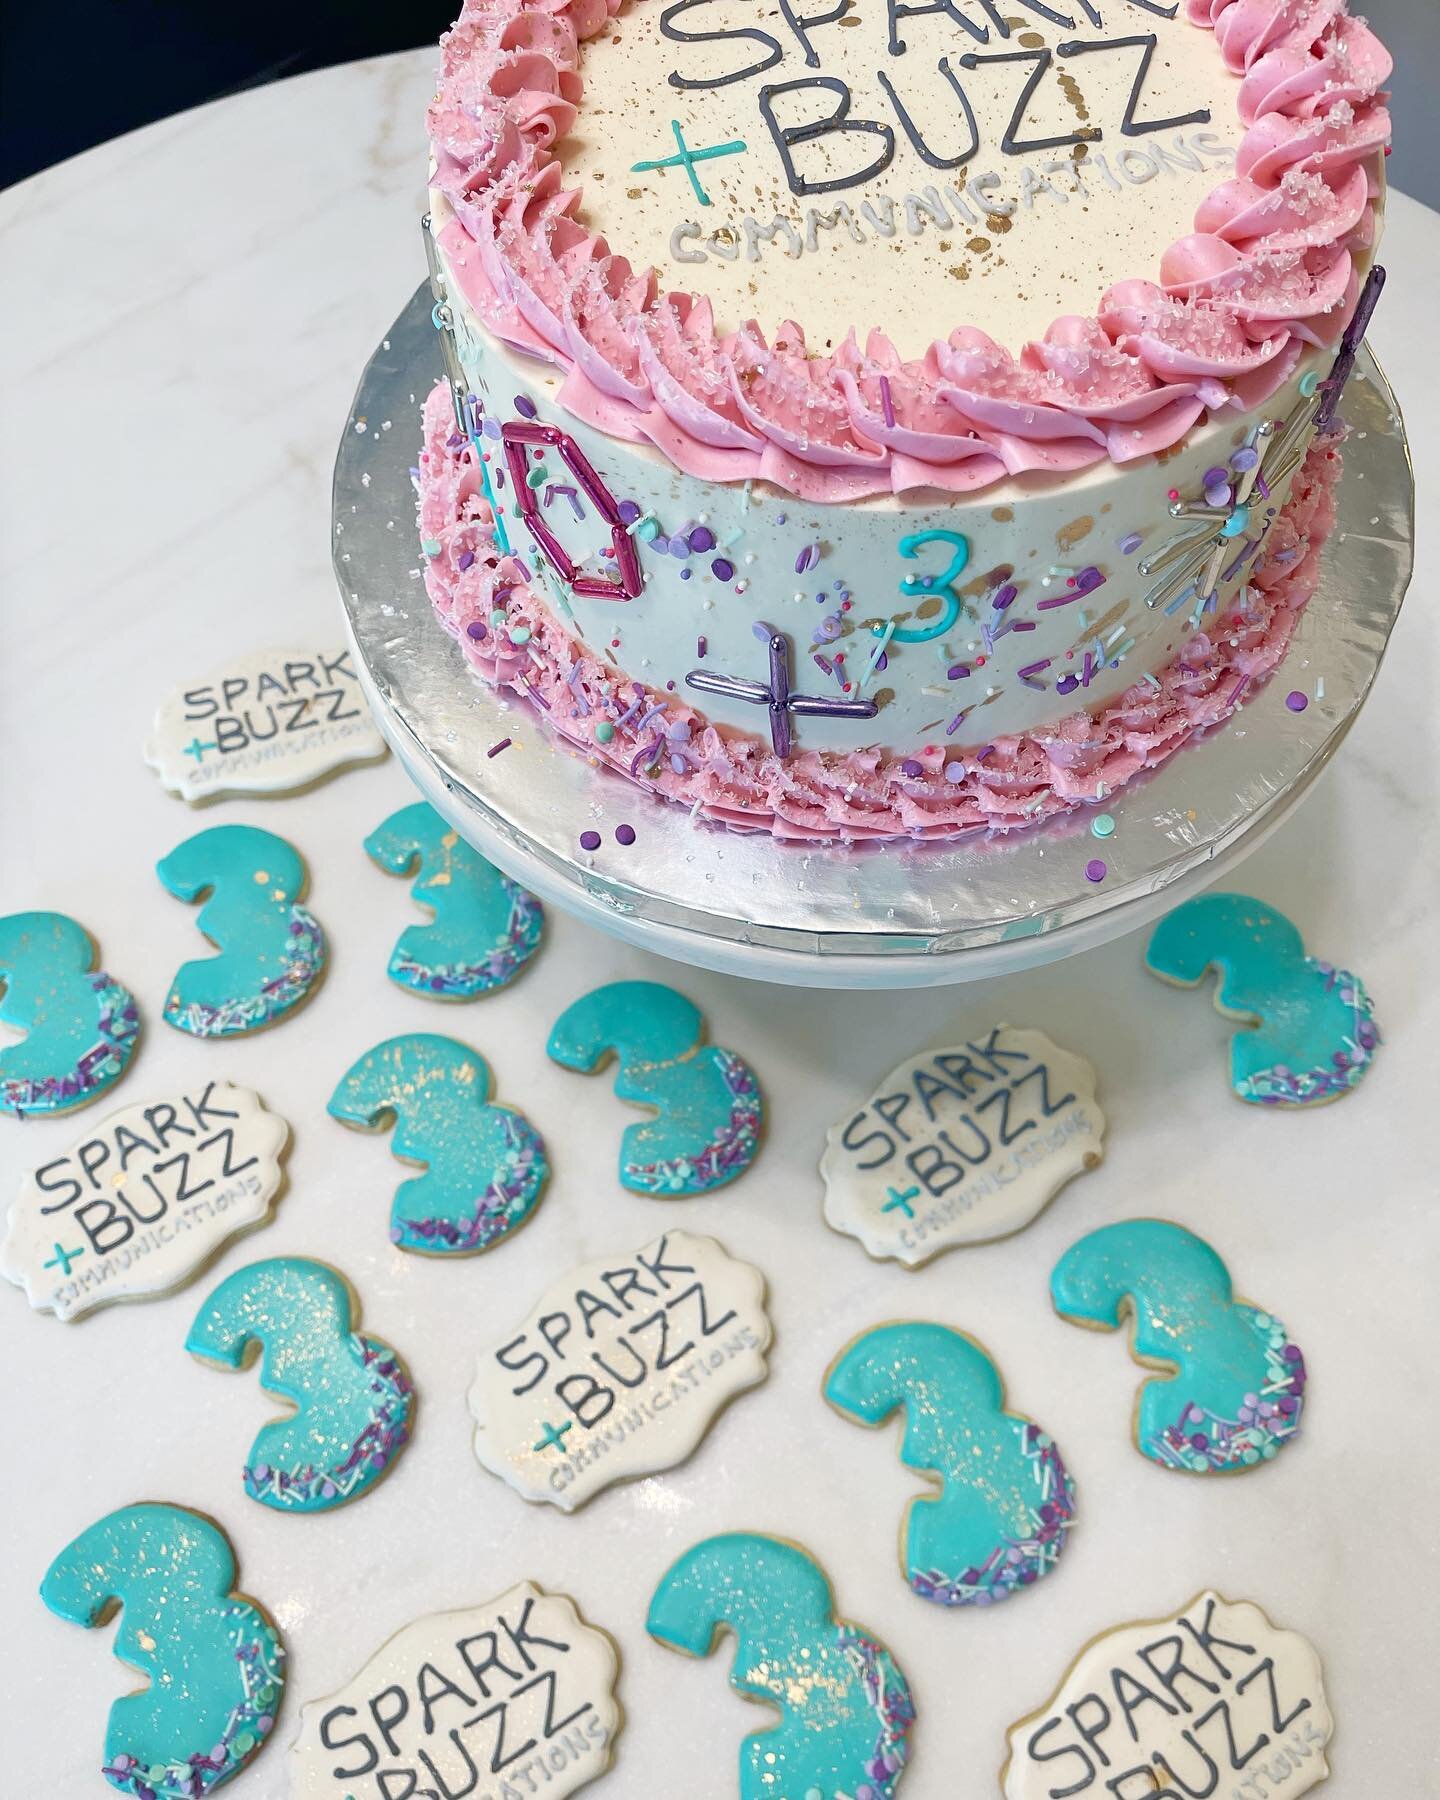 Pop the champagne 🍾 Spark + Buzz celebrated their 3rd birthday!! Cheers to my dearest Courtney @sparkandbuzz on her continued success!